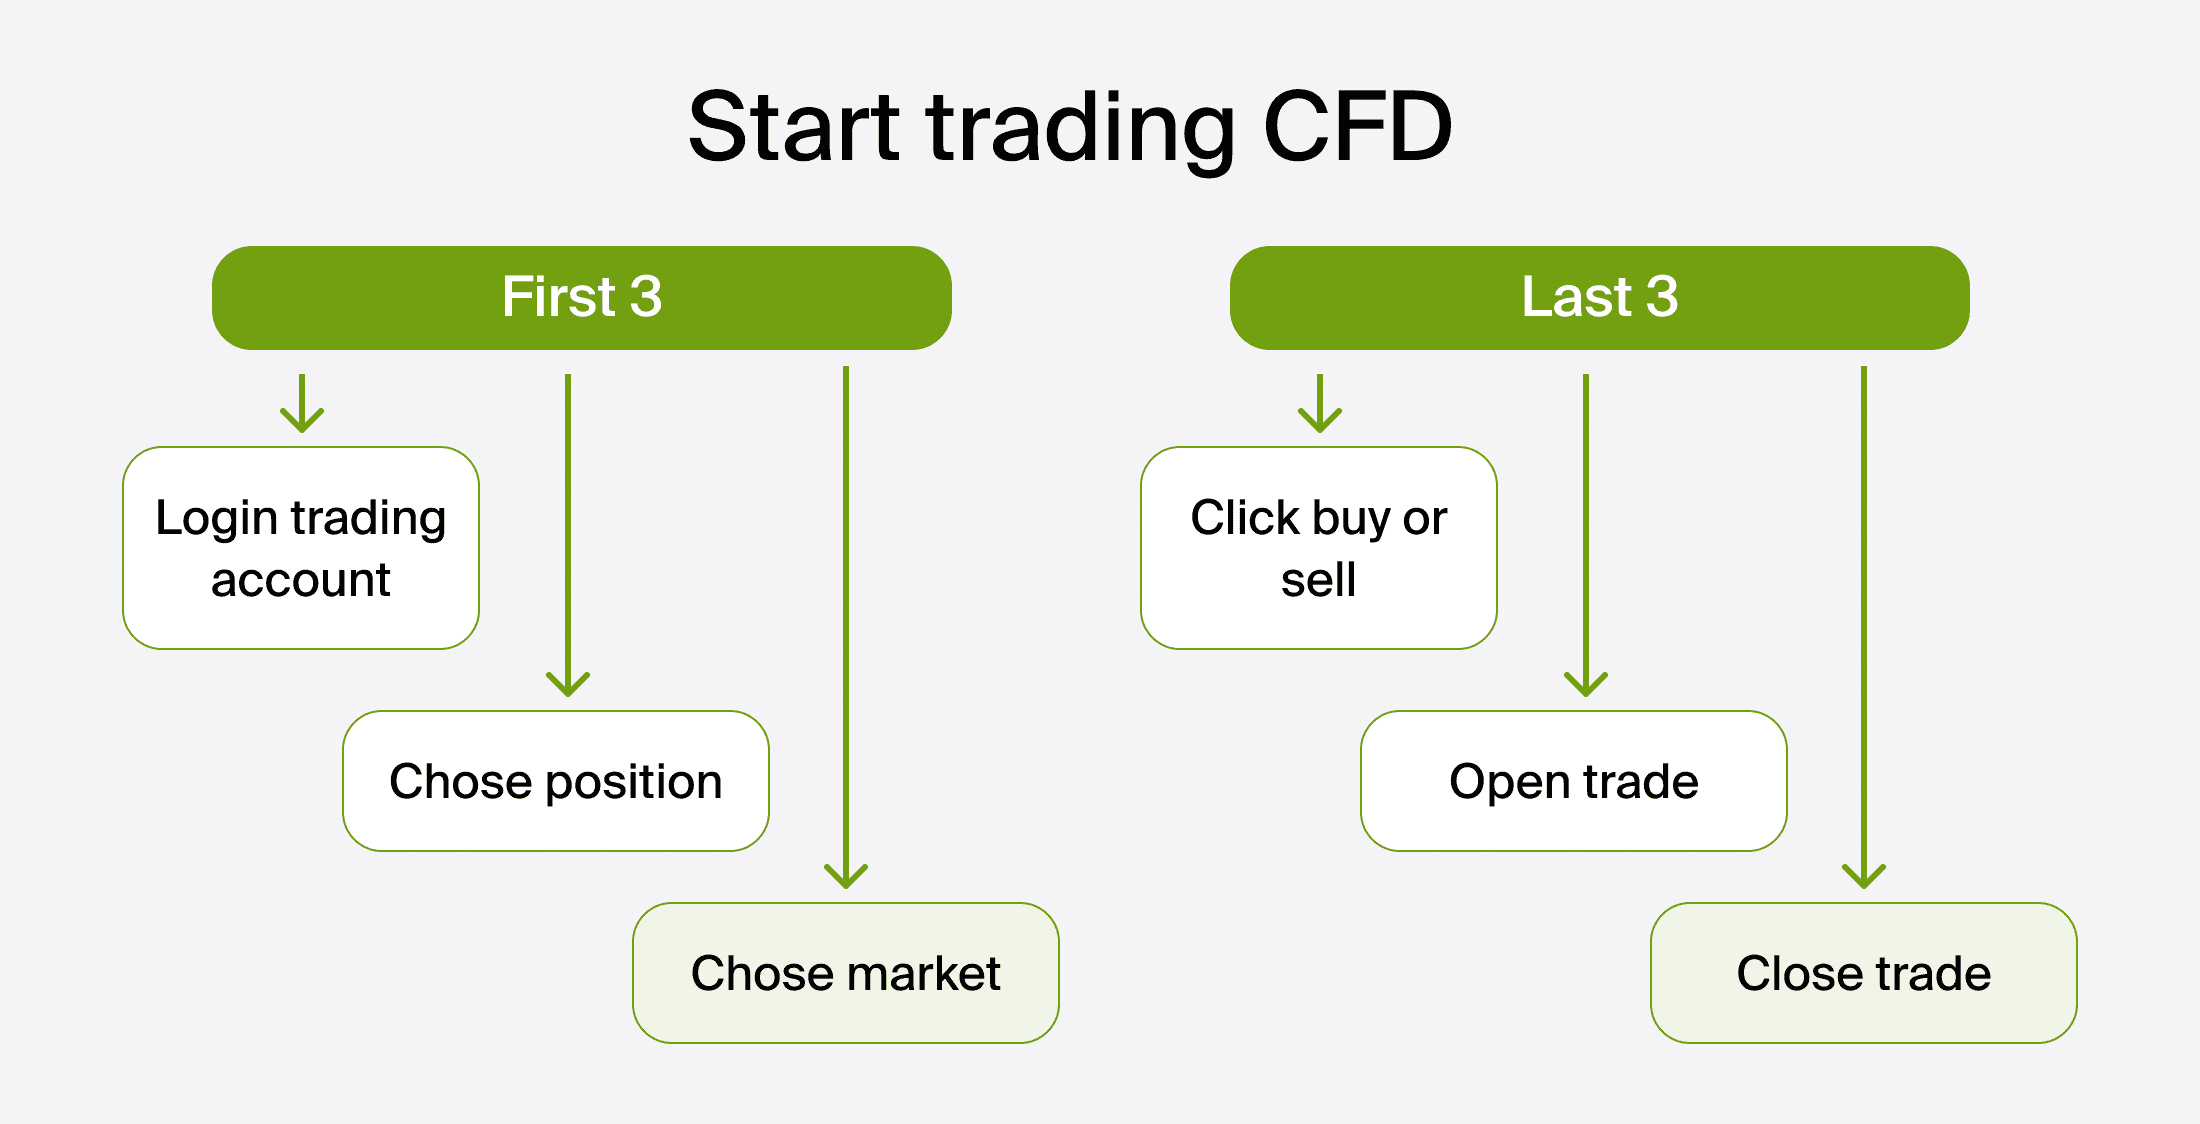 Strategies and Concepts in CFD Trading